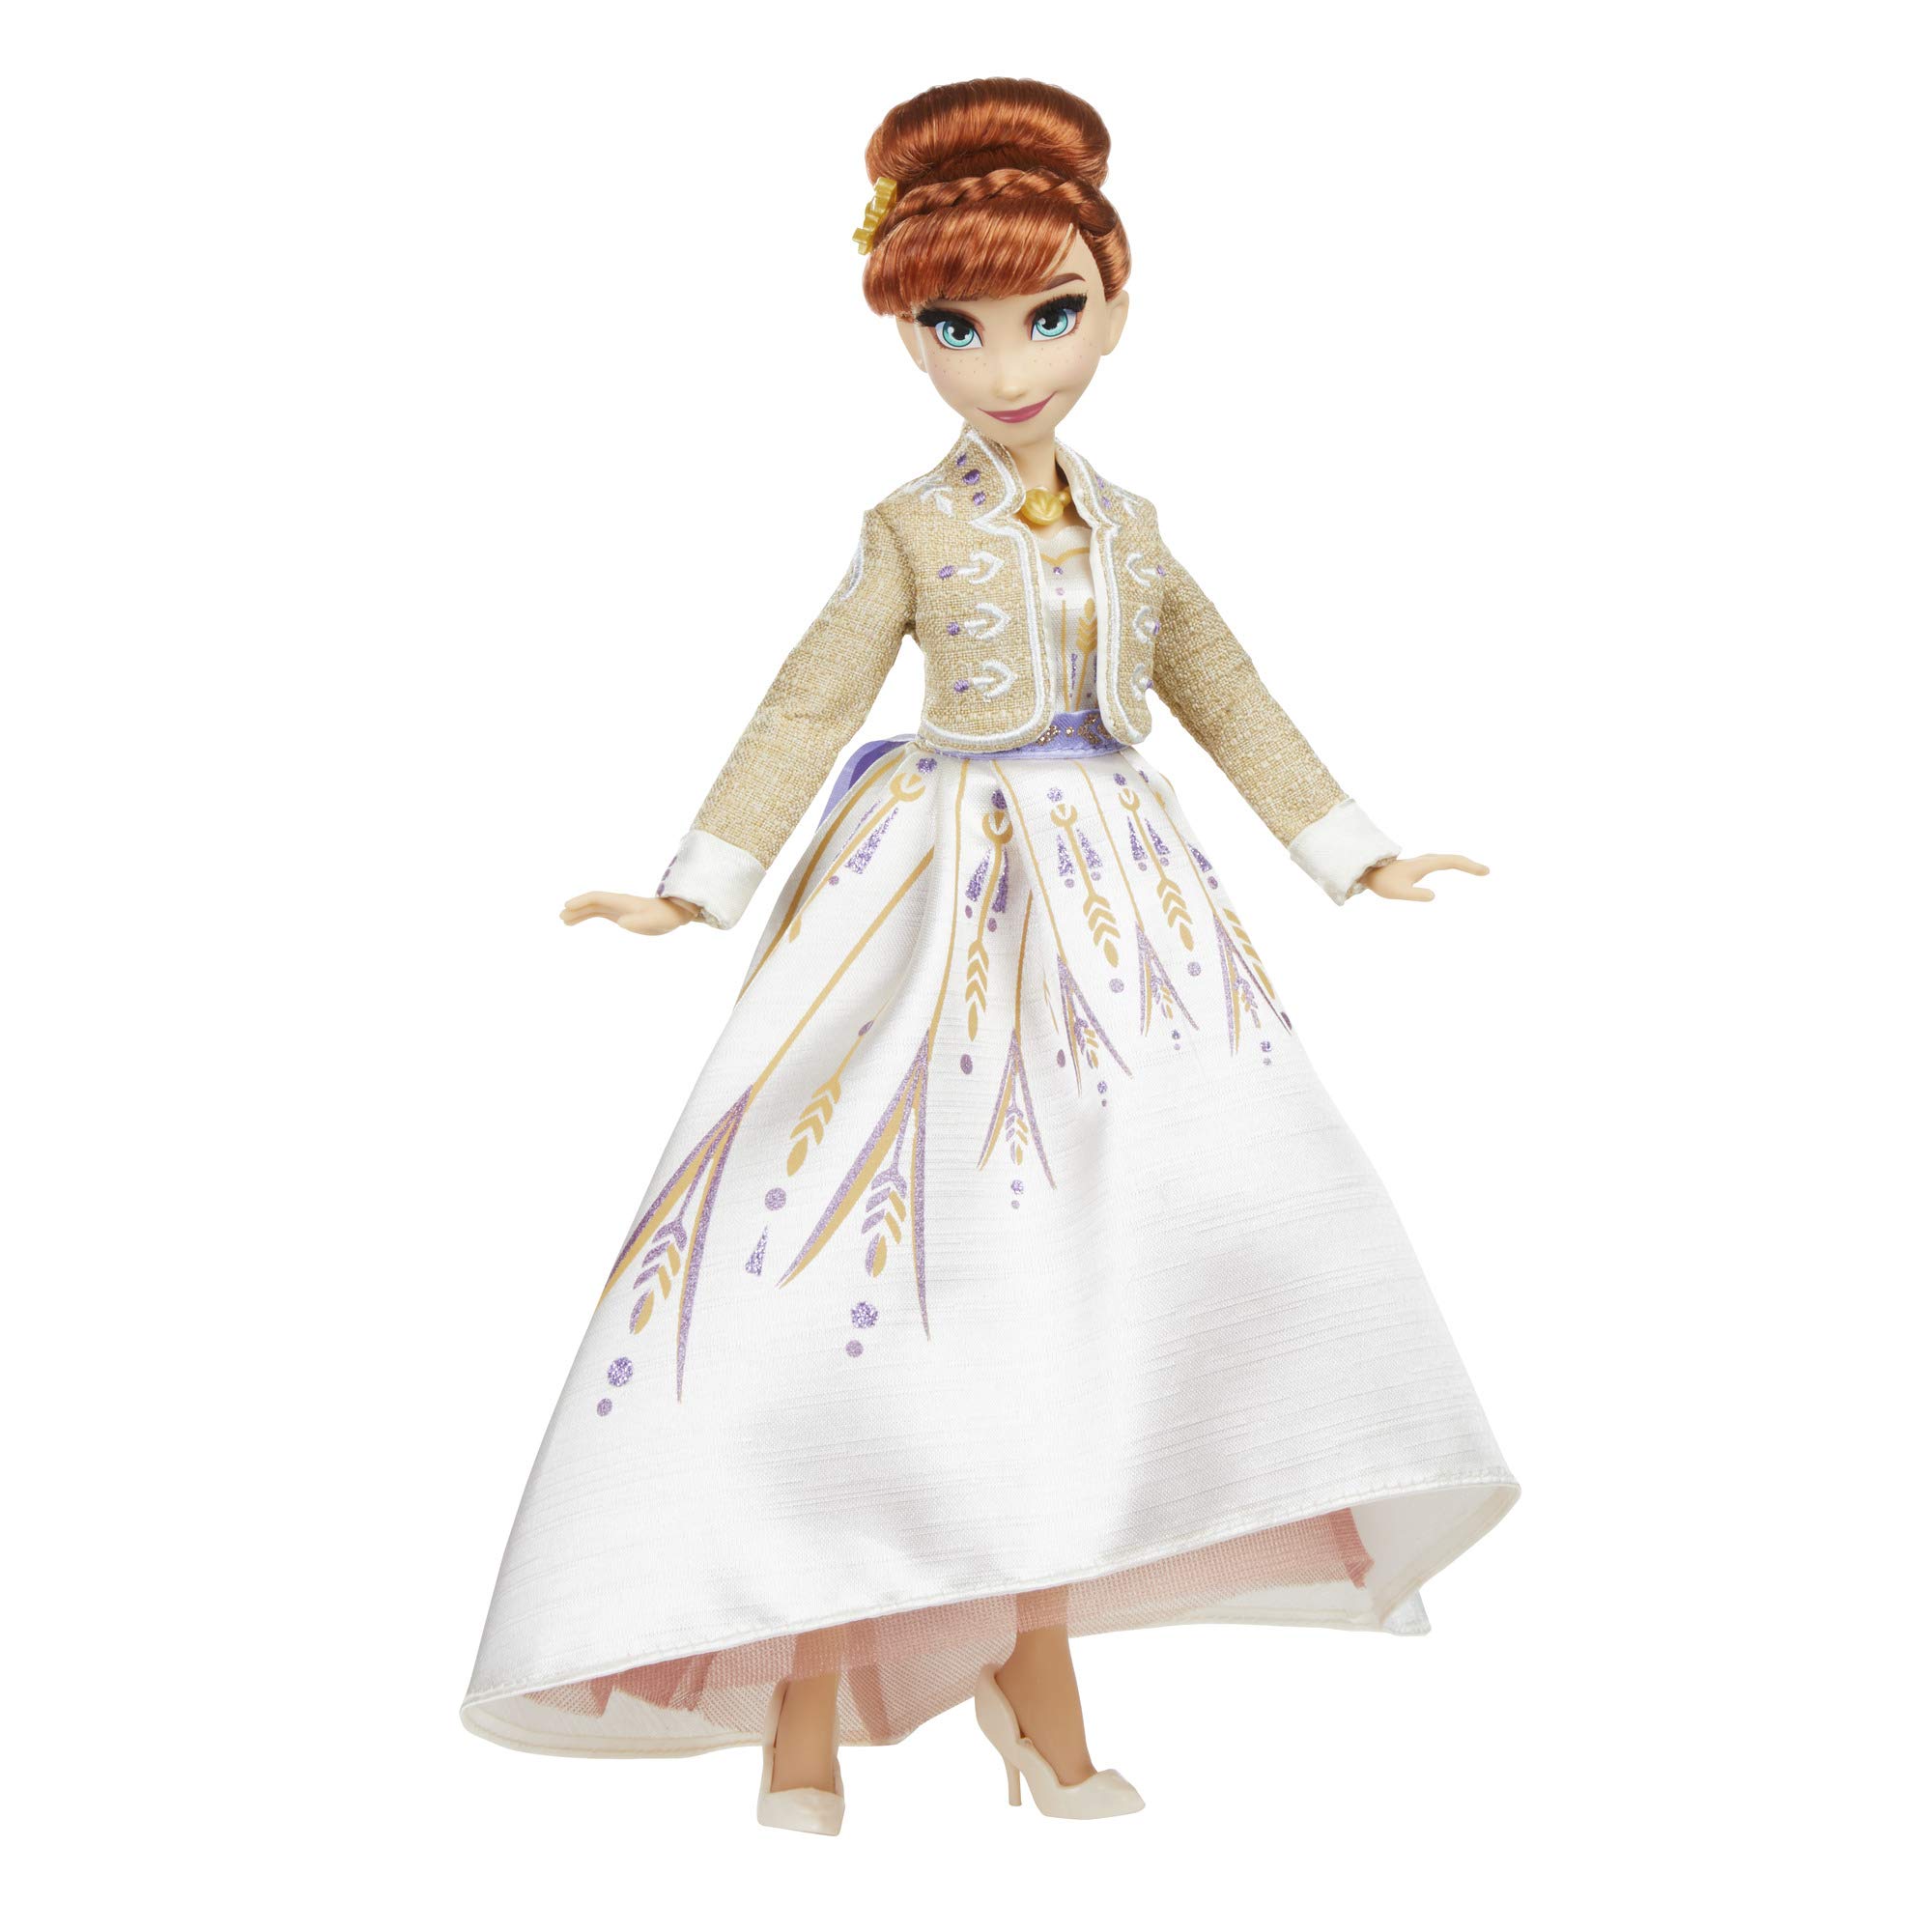 Disney Frozen Frozen Disney Elsa, Anna, & Olaf Deluxe Fashion Doll Collection Pack Set with Premium Dresses, Shoes and Accessories Inspired 2 (Amazon Exclusive)